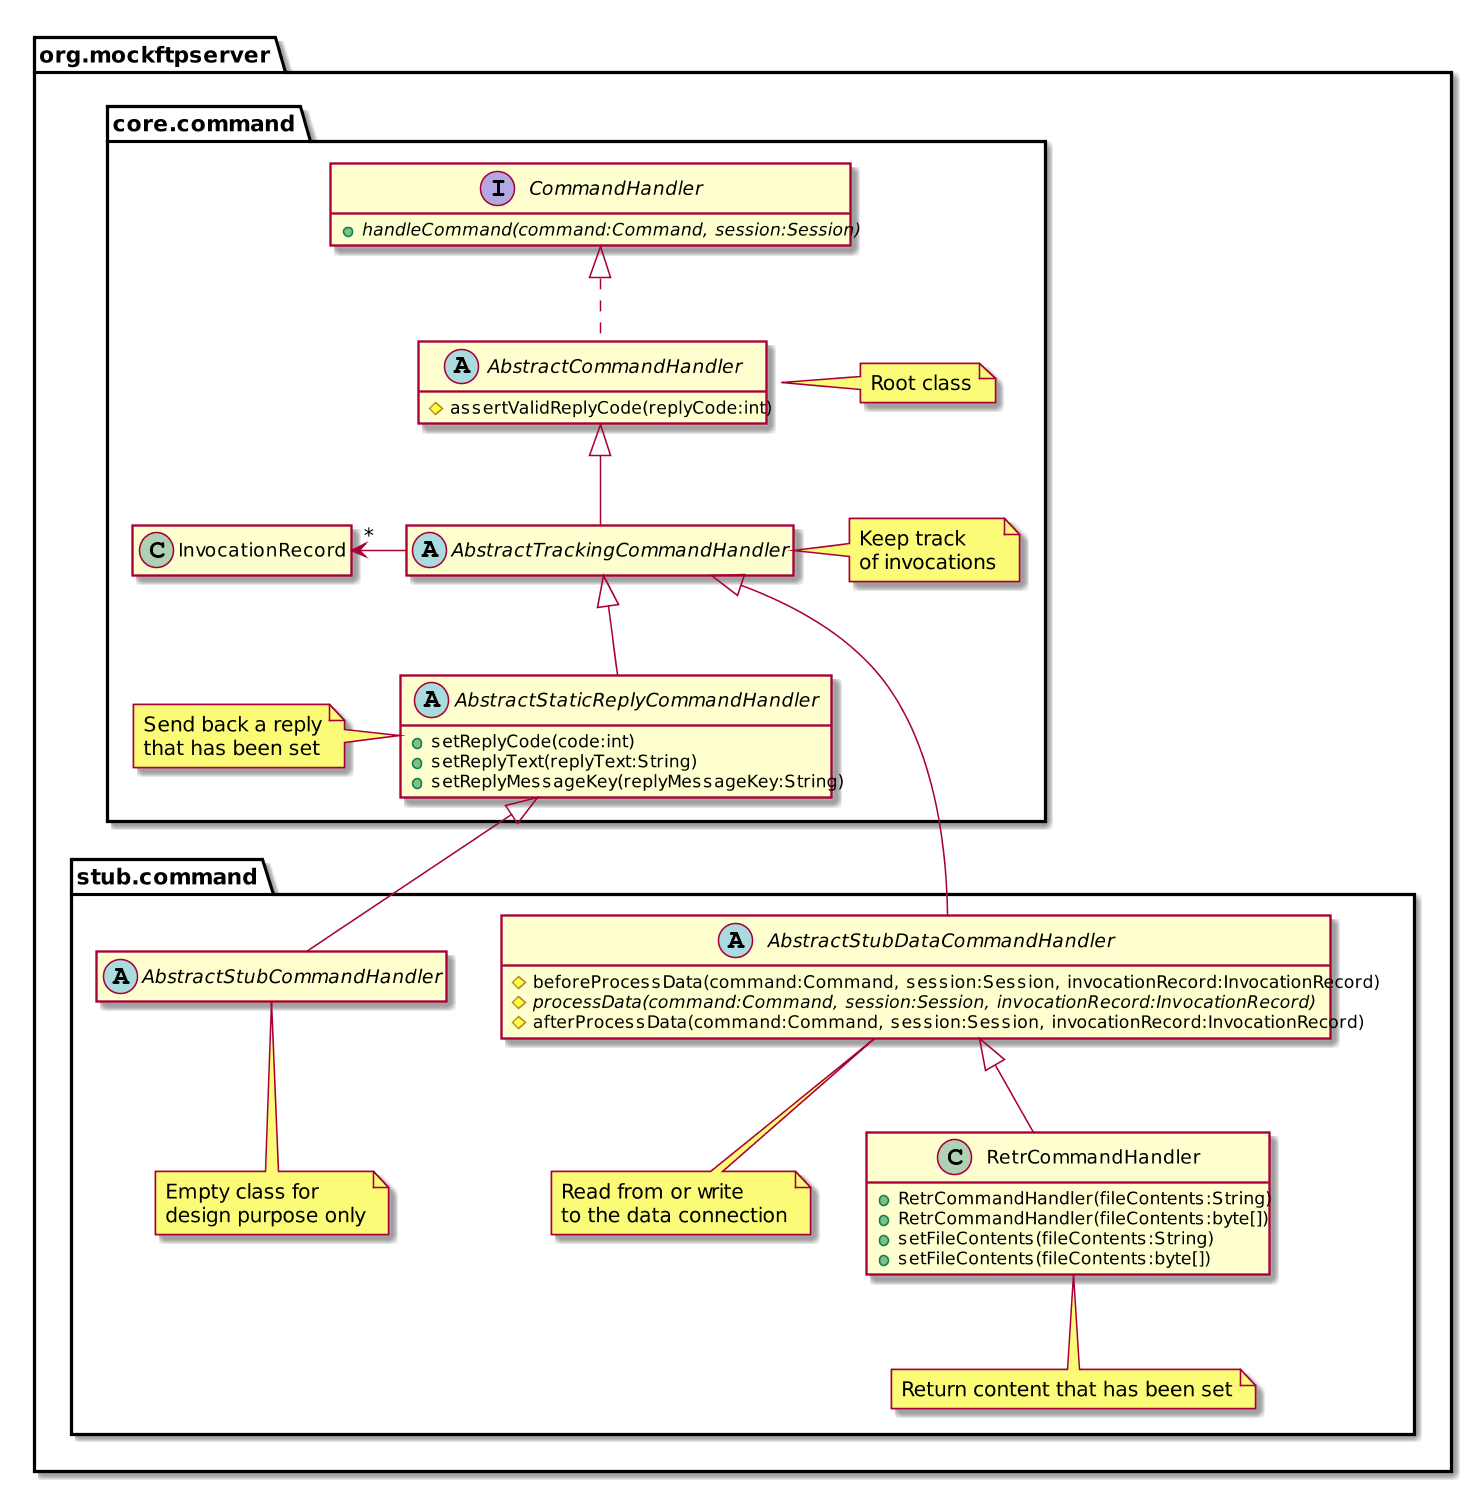 Fig. 5.12 - Command handler class hierarchy overview